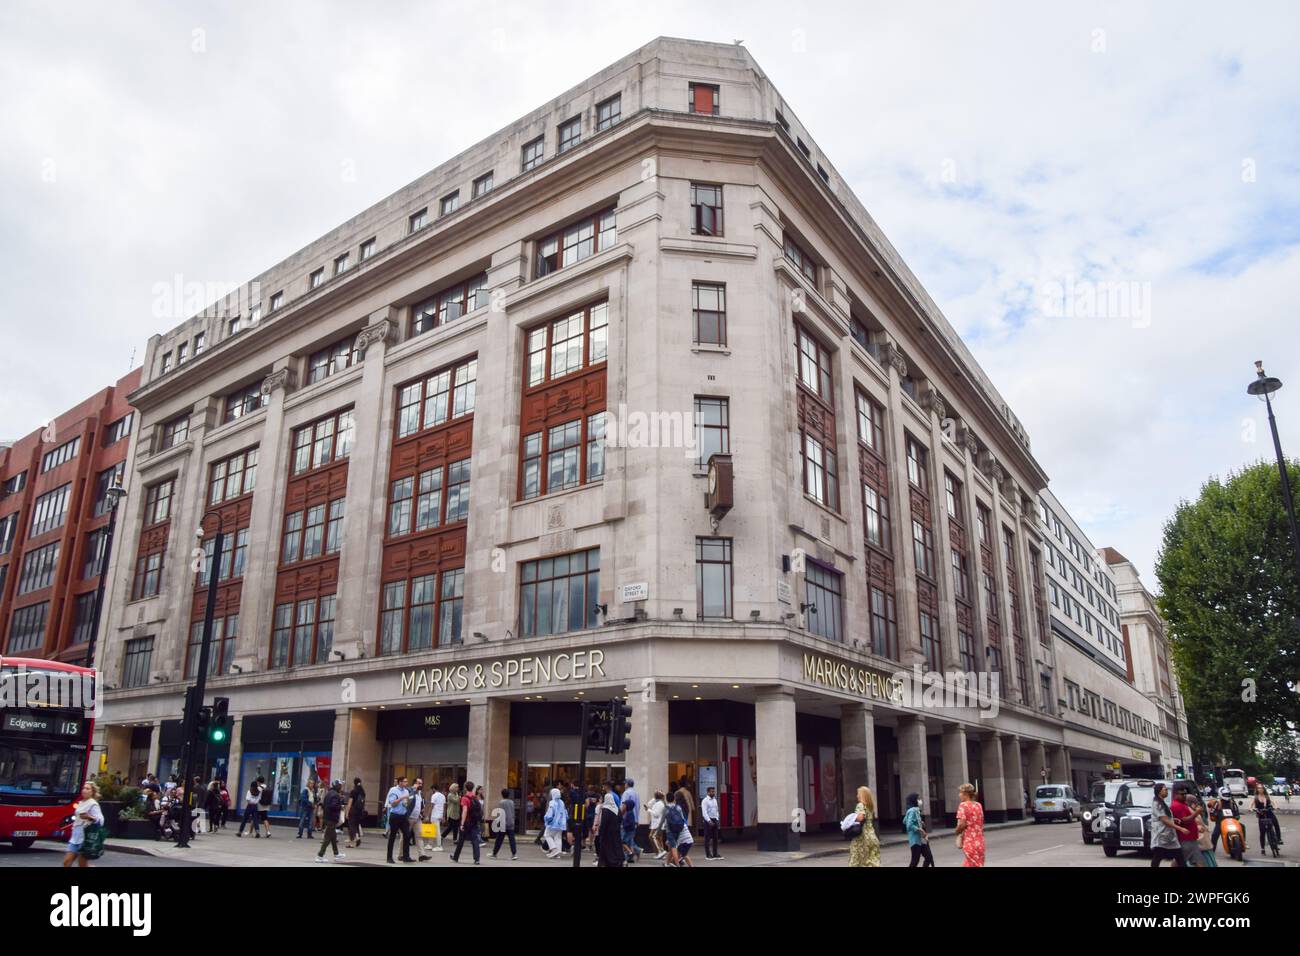 London, UK. 22nd August 2022. Exterior view of Marks & Spencer store on Oxford Street. Credit: Vuk Valcic/Alamy Stock Photo